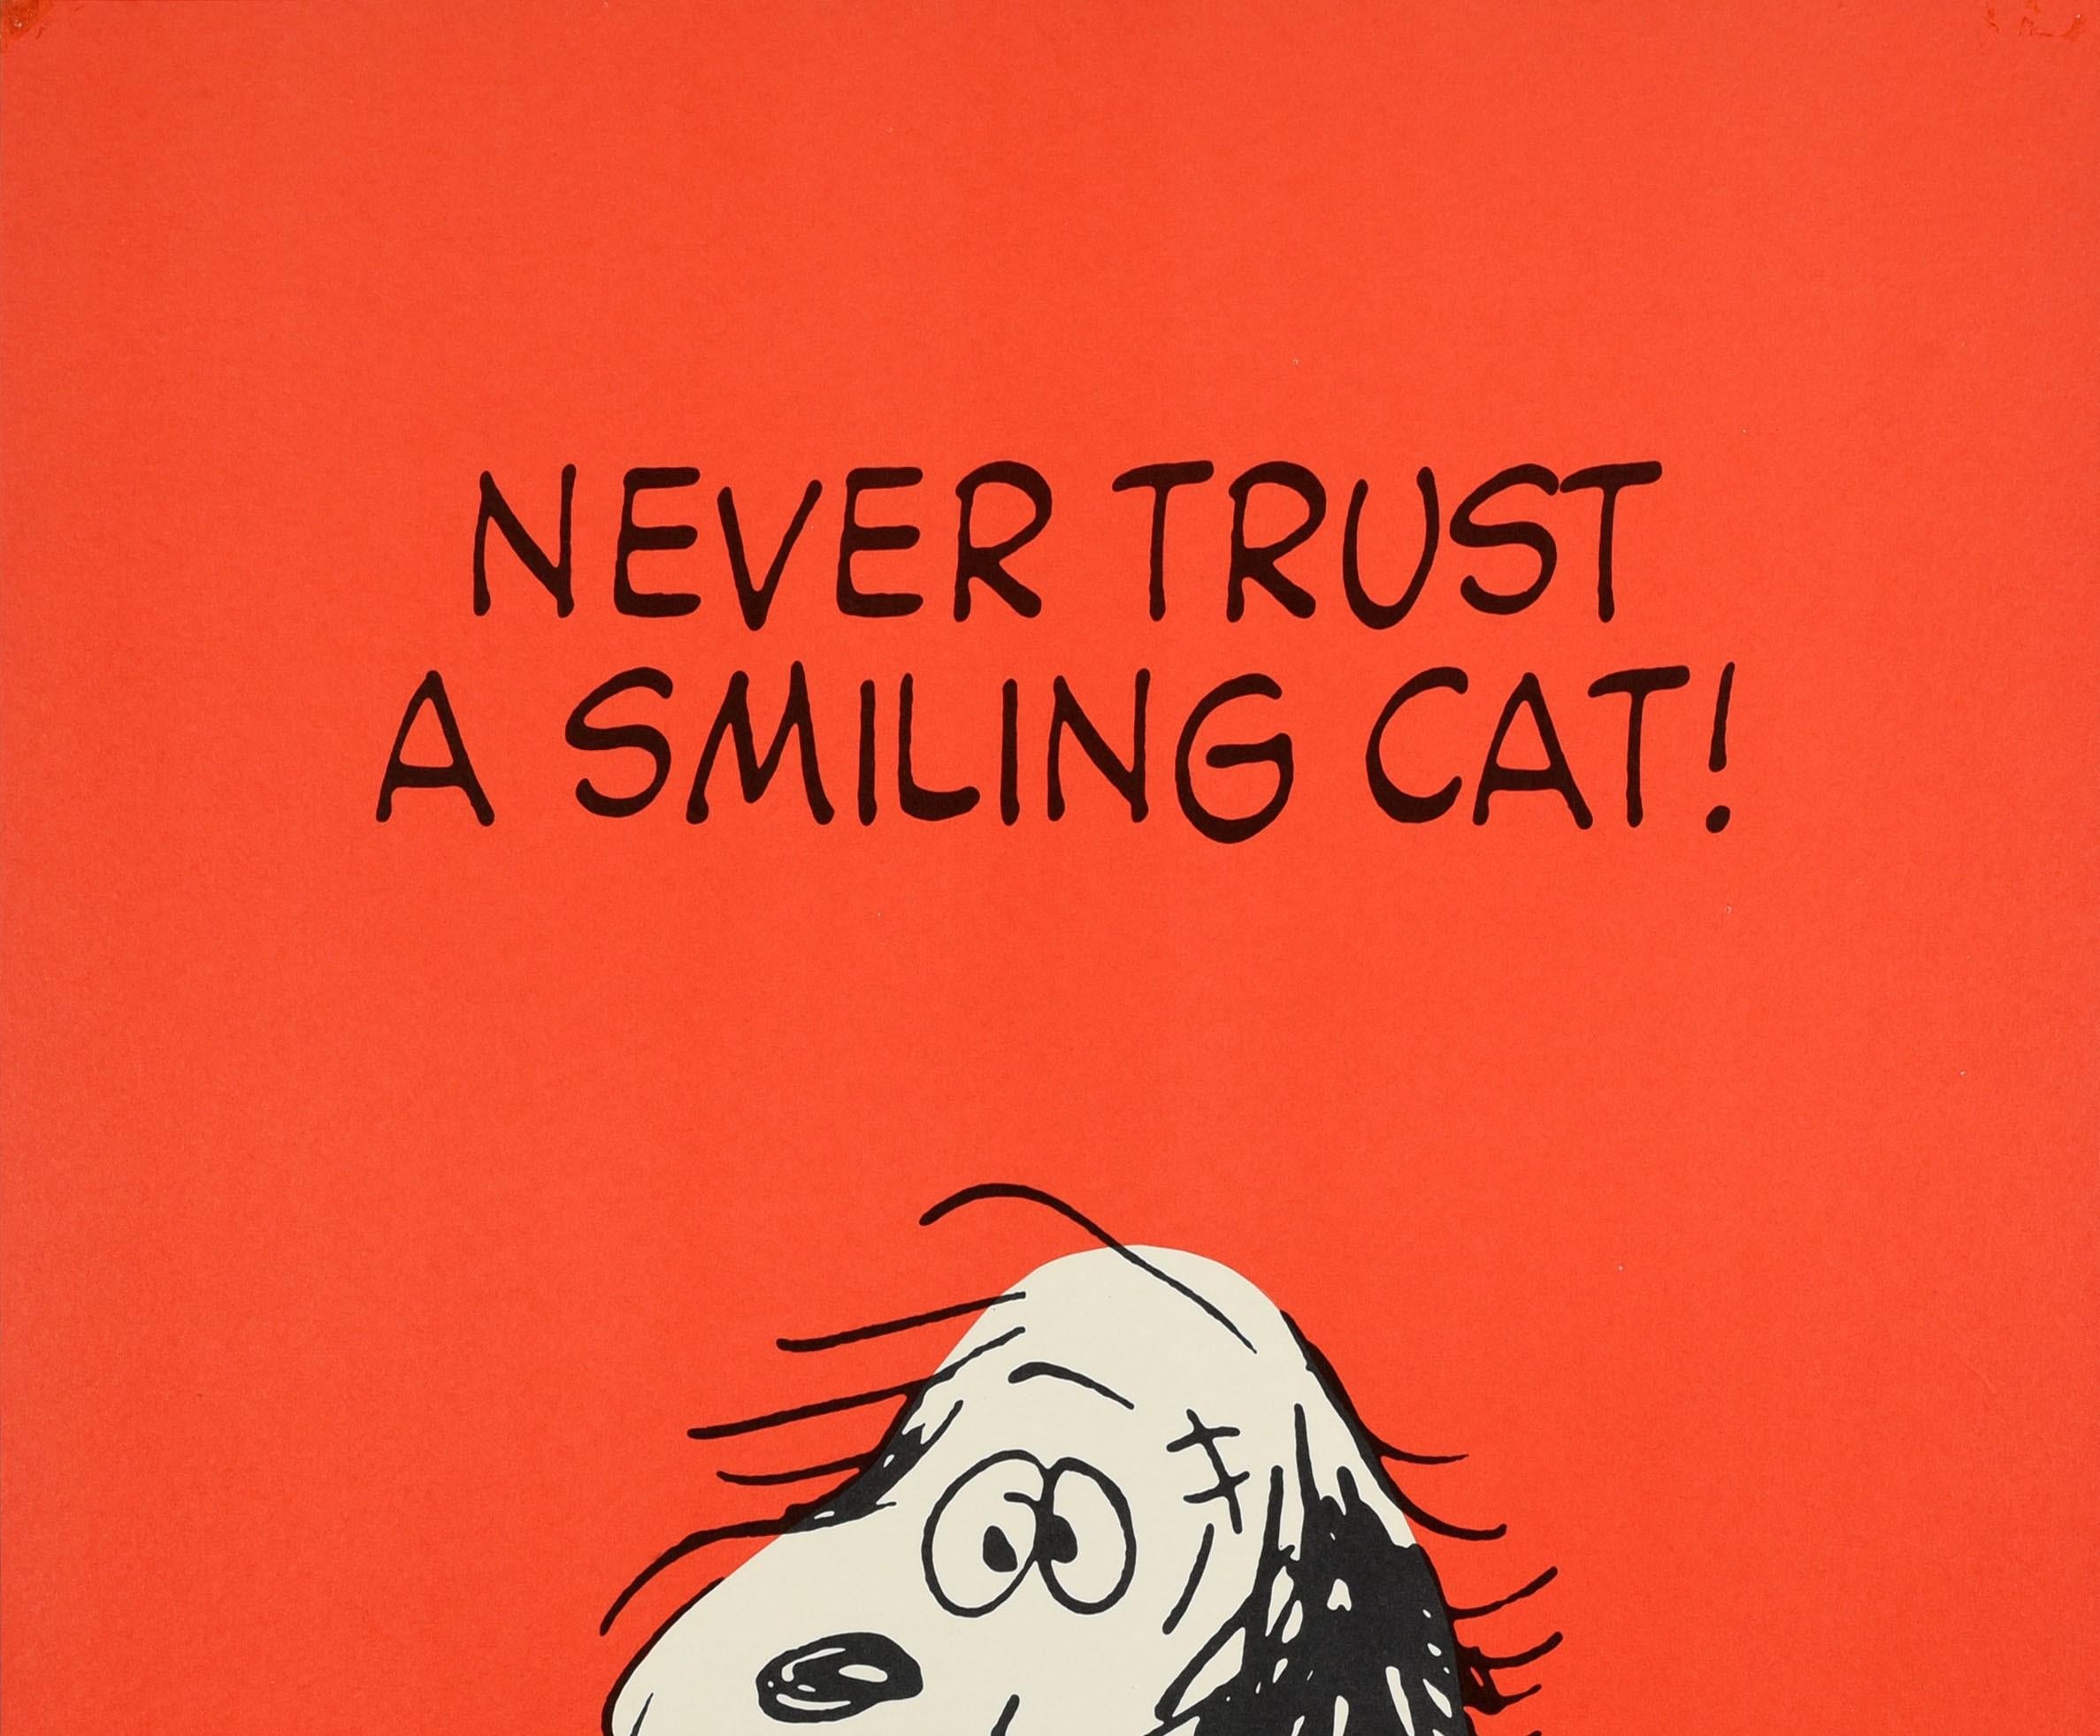 Original vintage poster featuring the iconic comic character Snoopy the Dog by the notable American cartoonist Charles M. Schulz (Charles Monroe Schulz; 1922-2000) - Never trust a smiling cat! Fun cartoon design featuring a dazed Snoopy sitting on